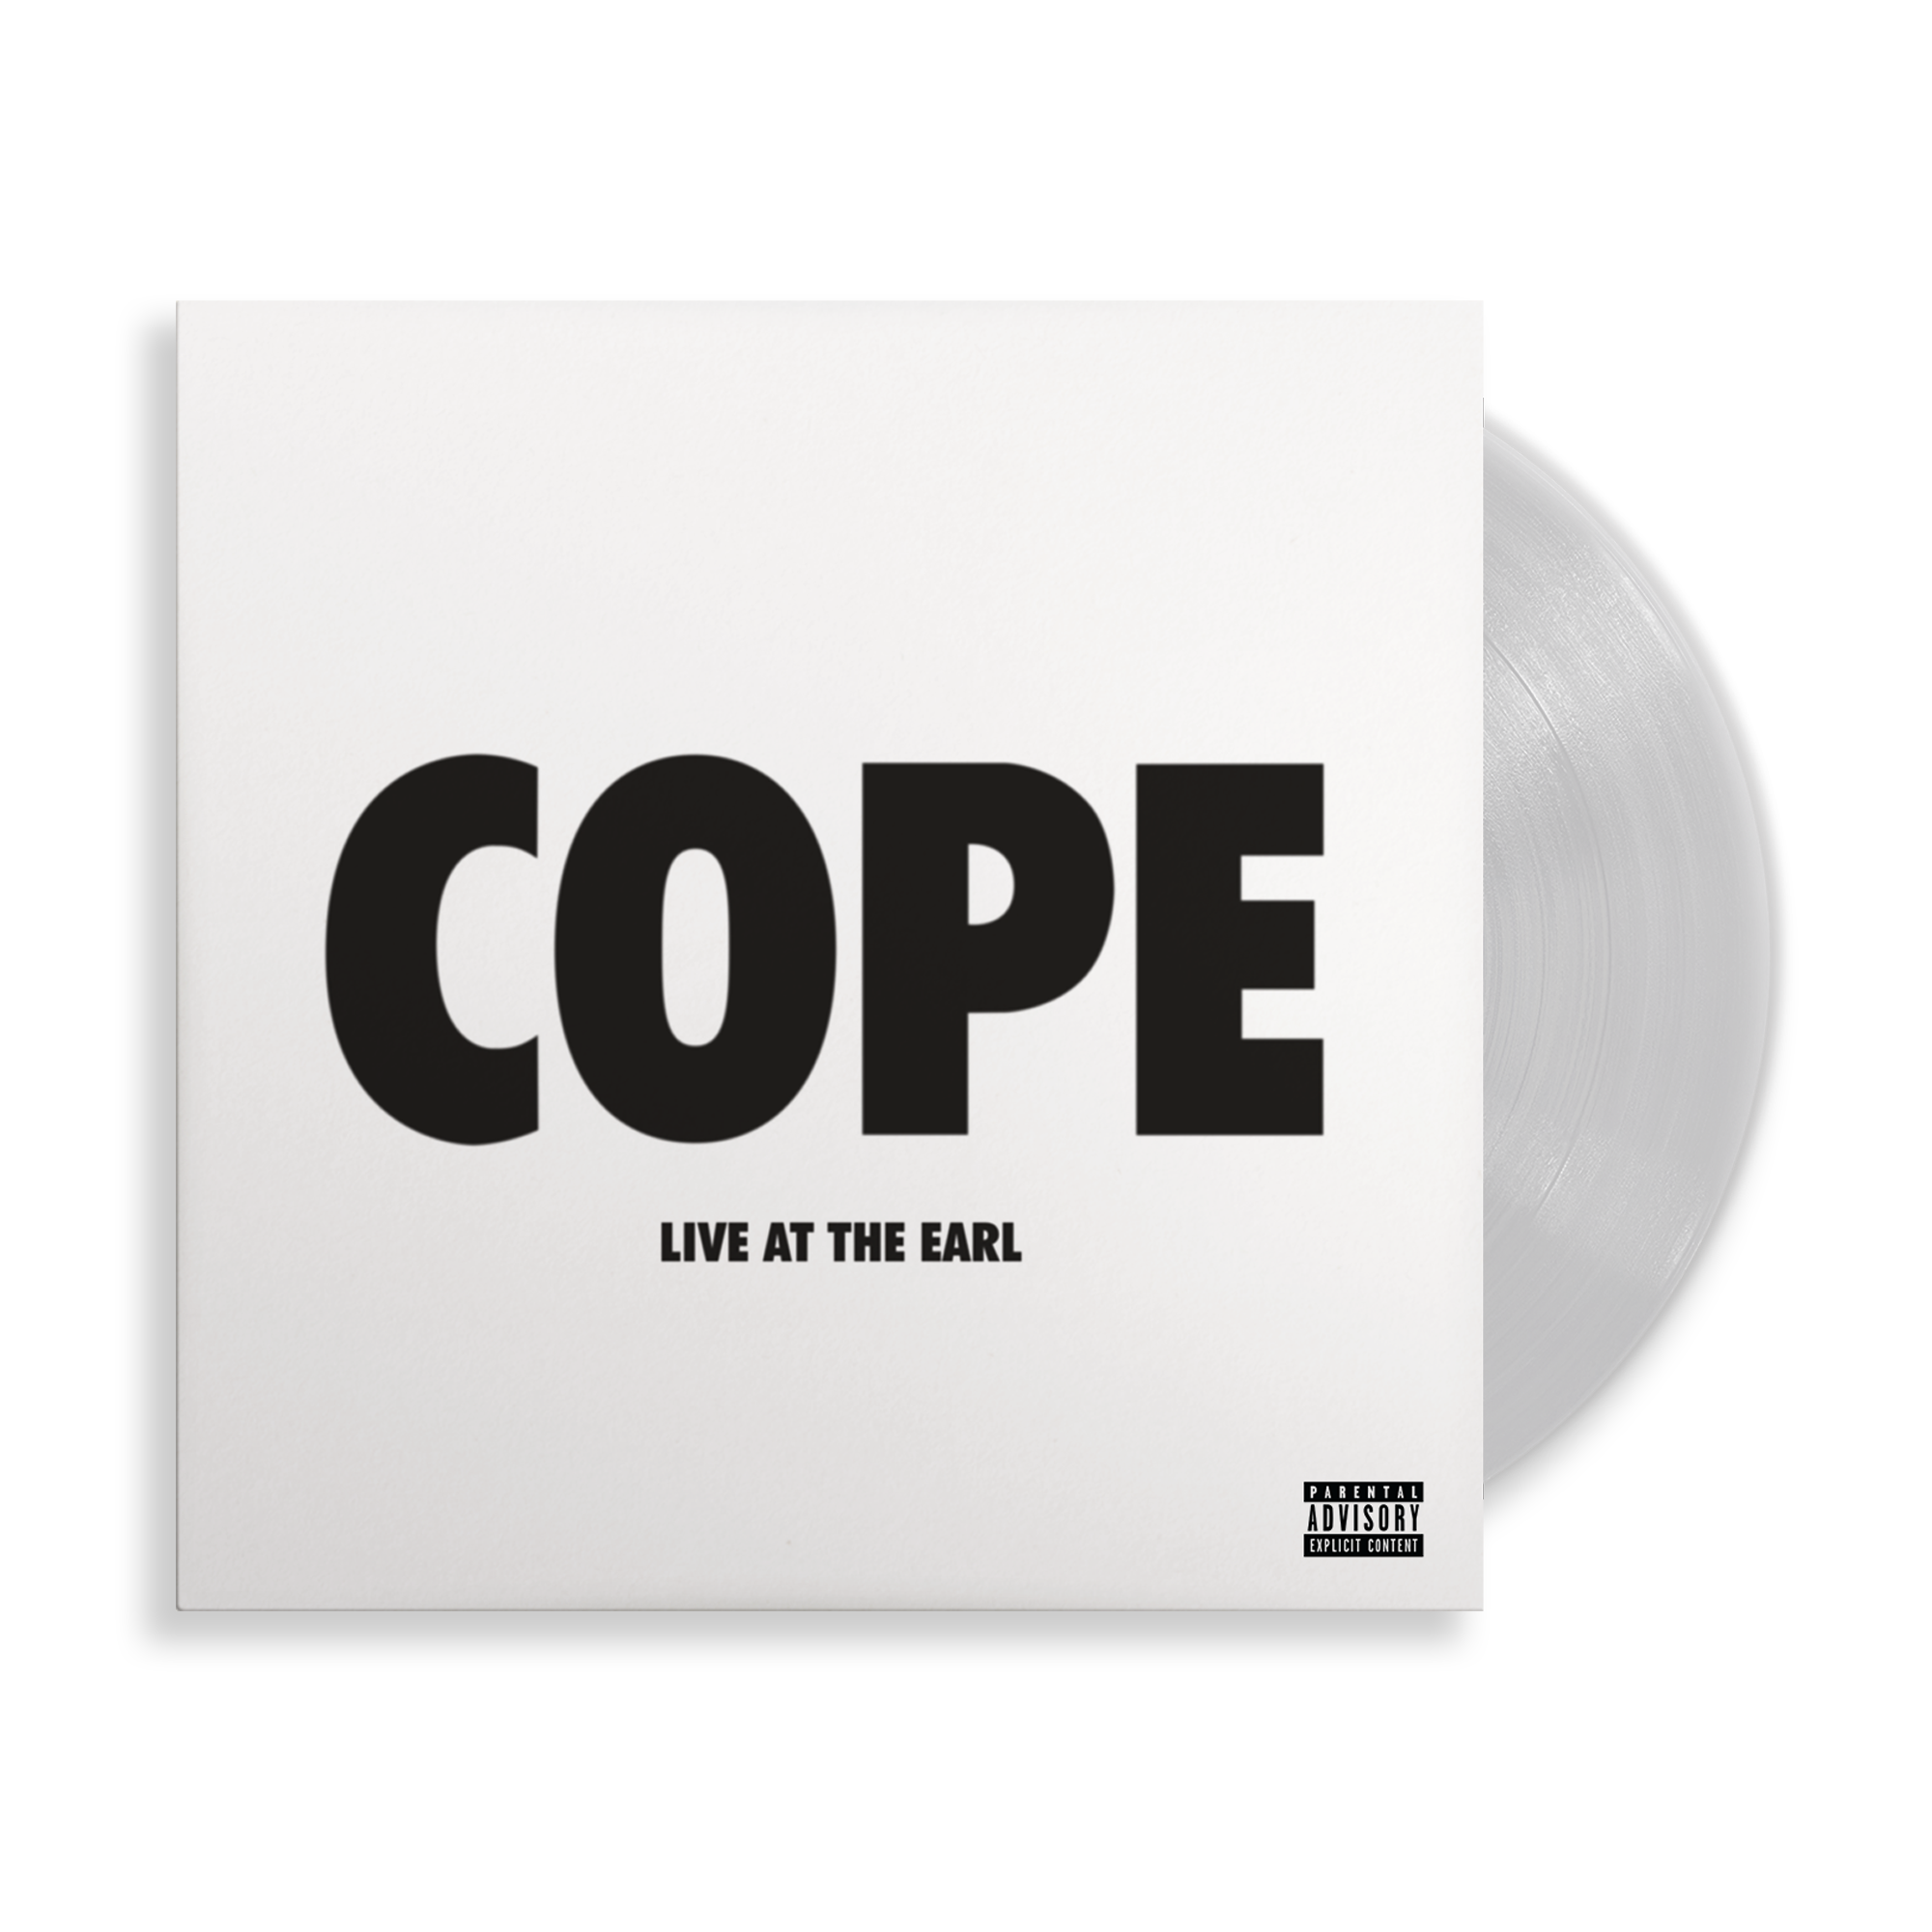 COPE - Live at The Earl: Limited Clear Vinyl LP + Exclusive Print